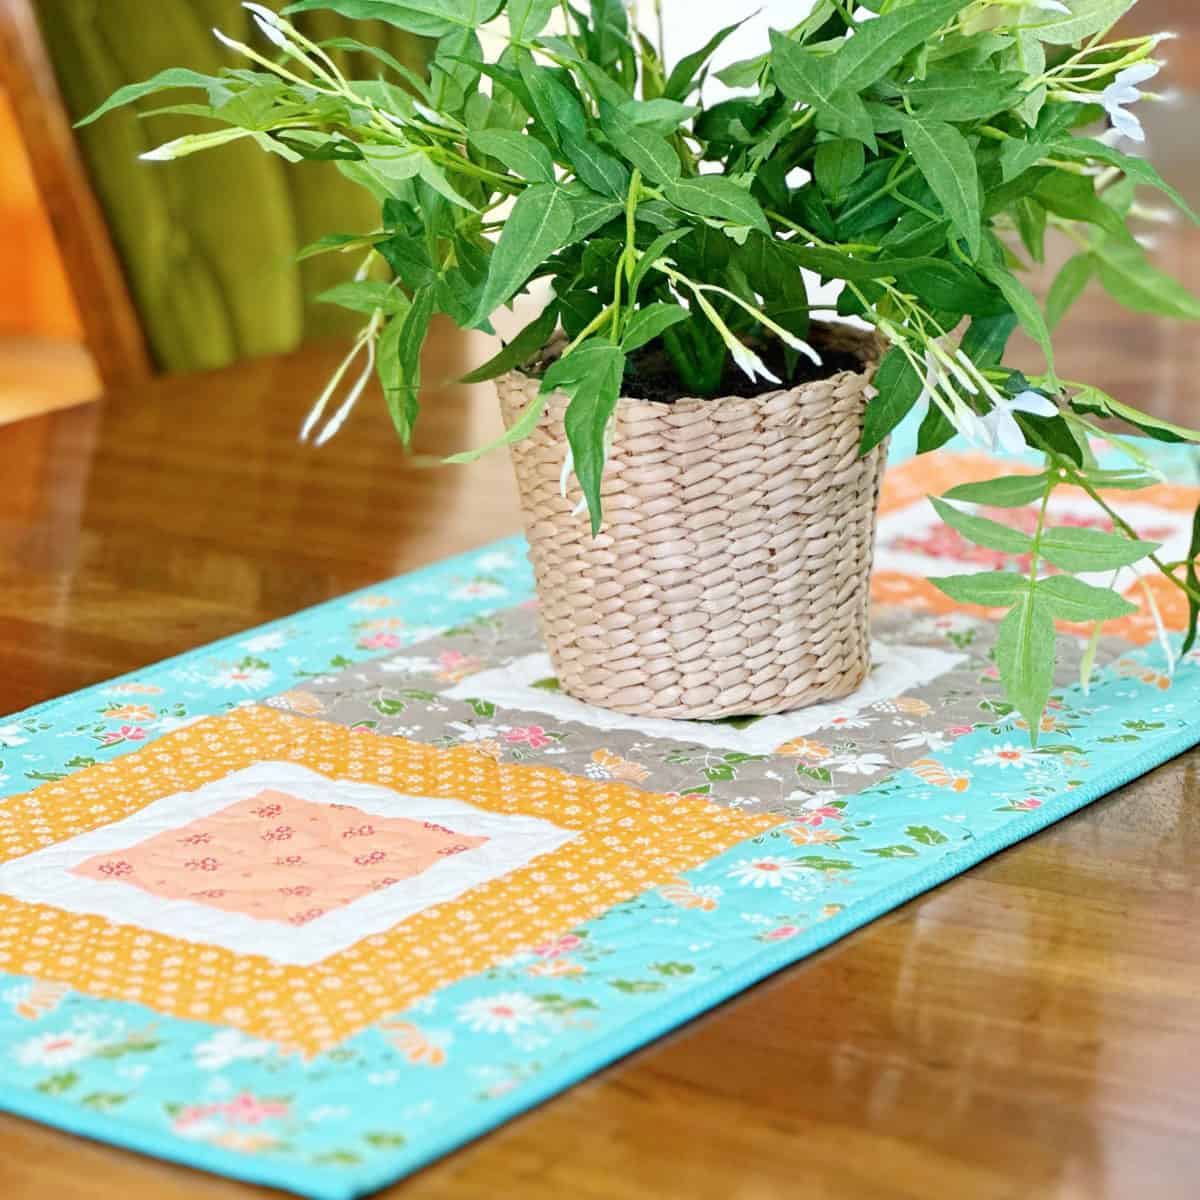 Quilted patchwork table runner with potted green plant on table